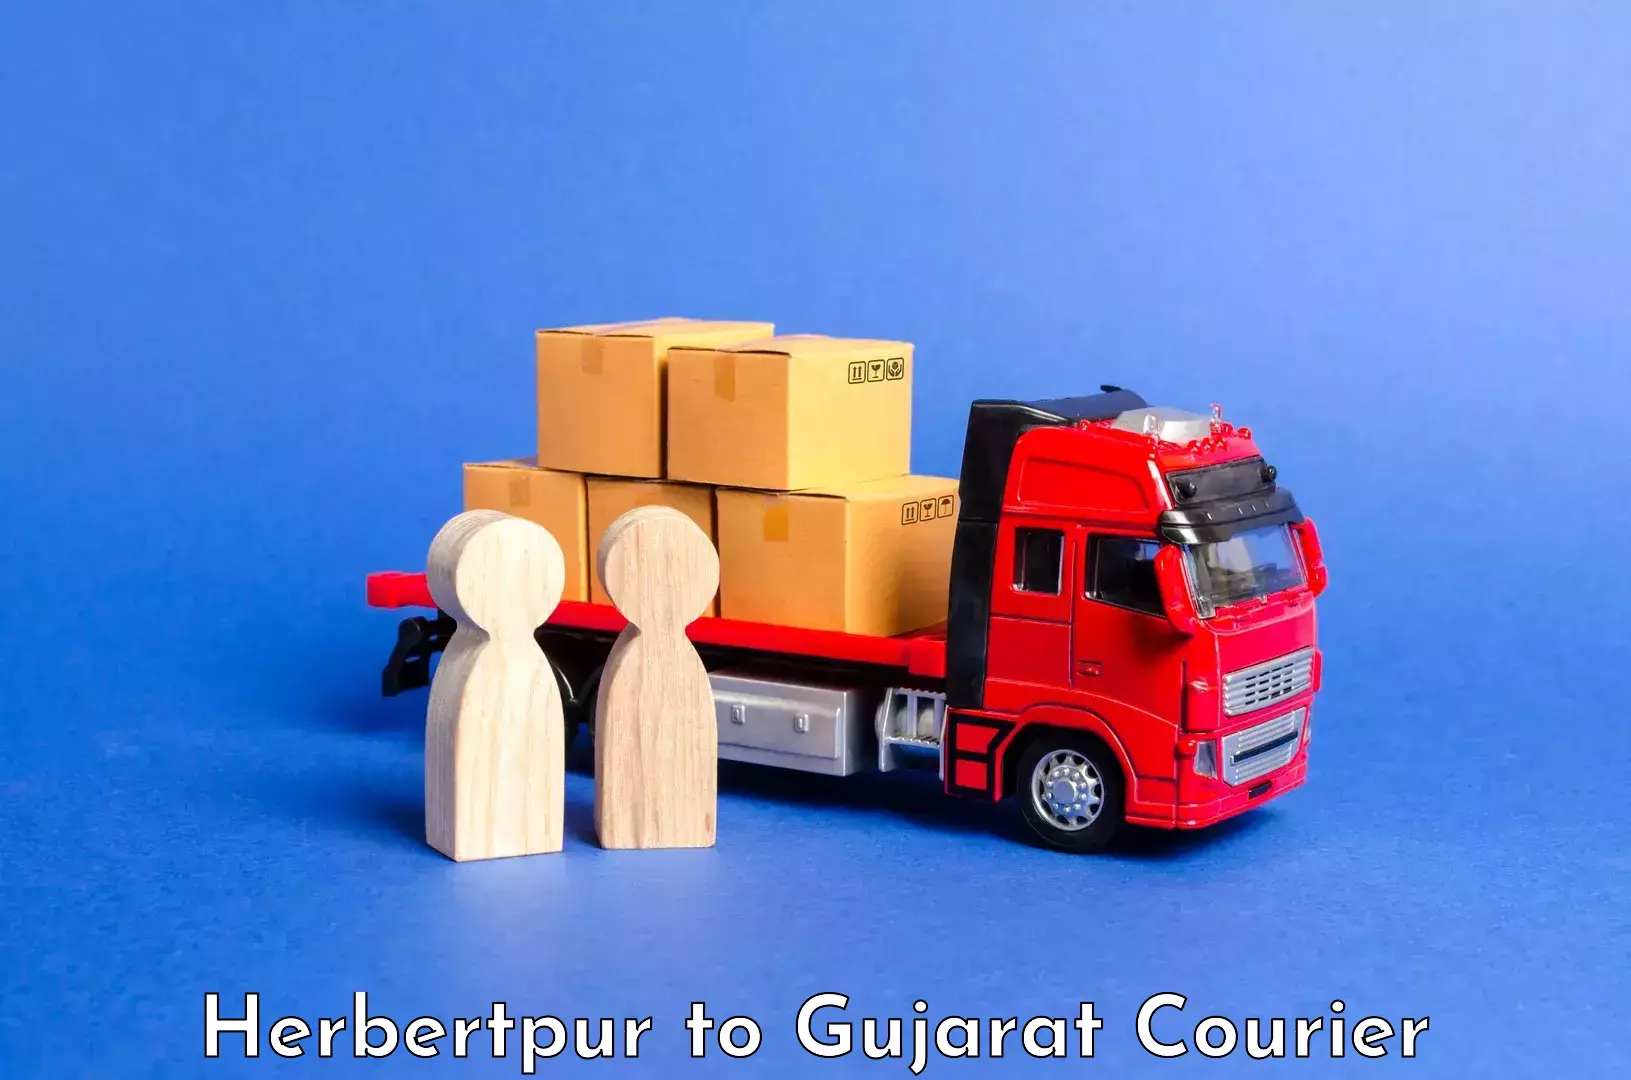 Express luggage delivery in Herbertpur to Dholera